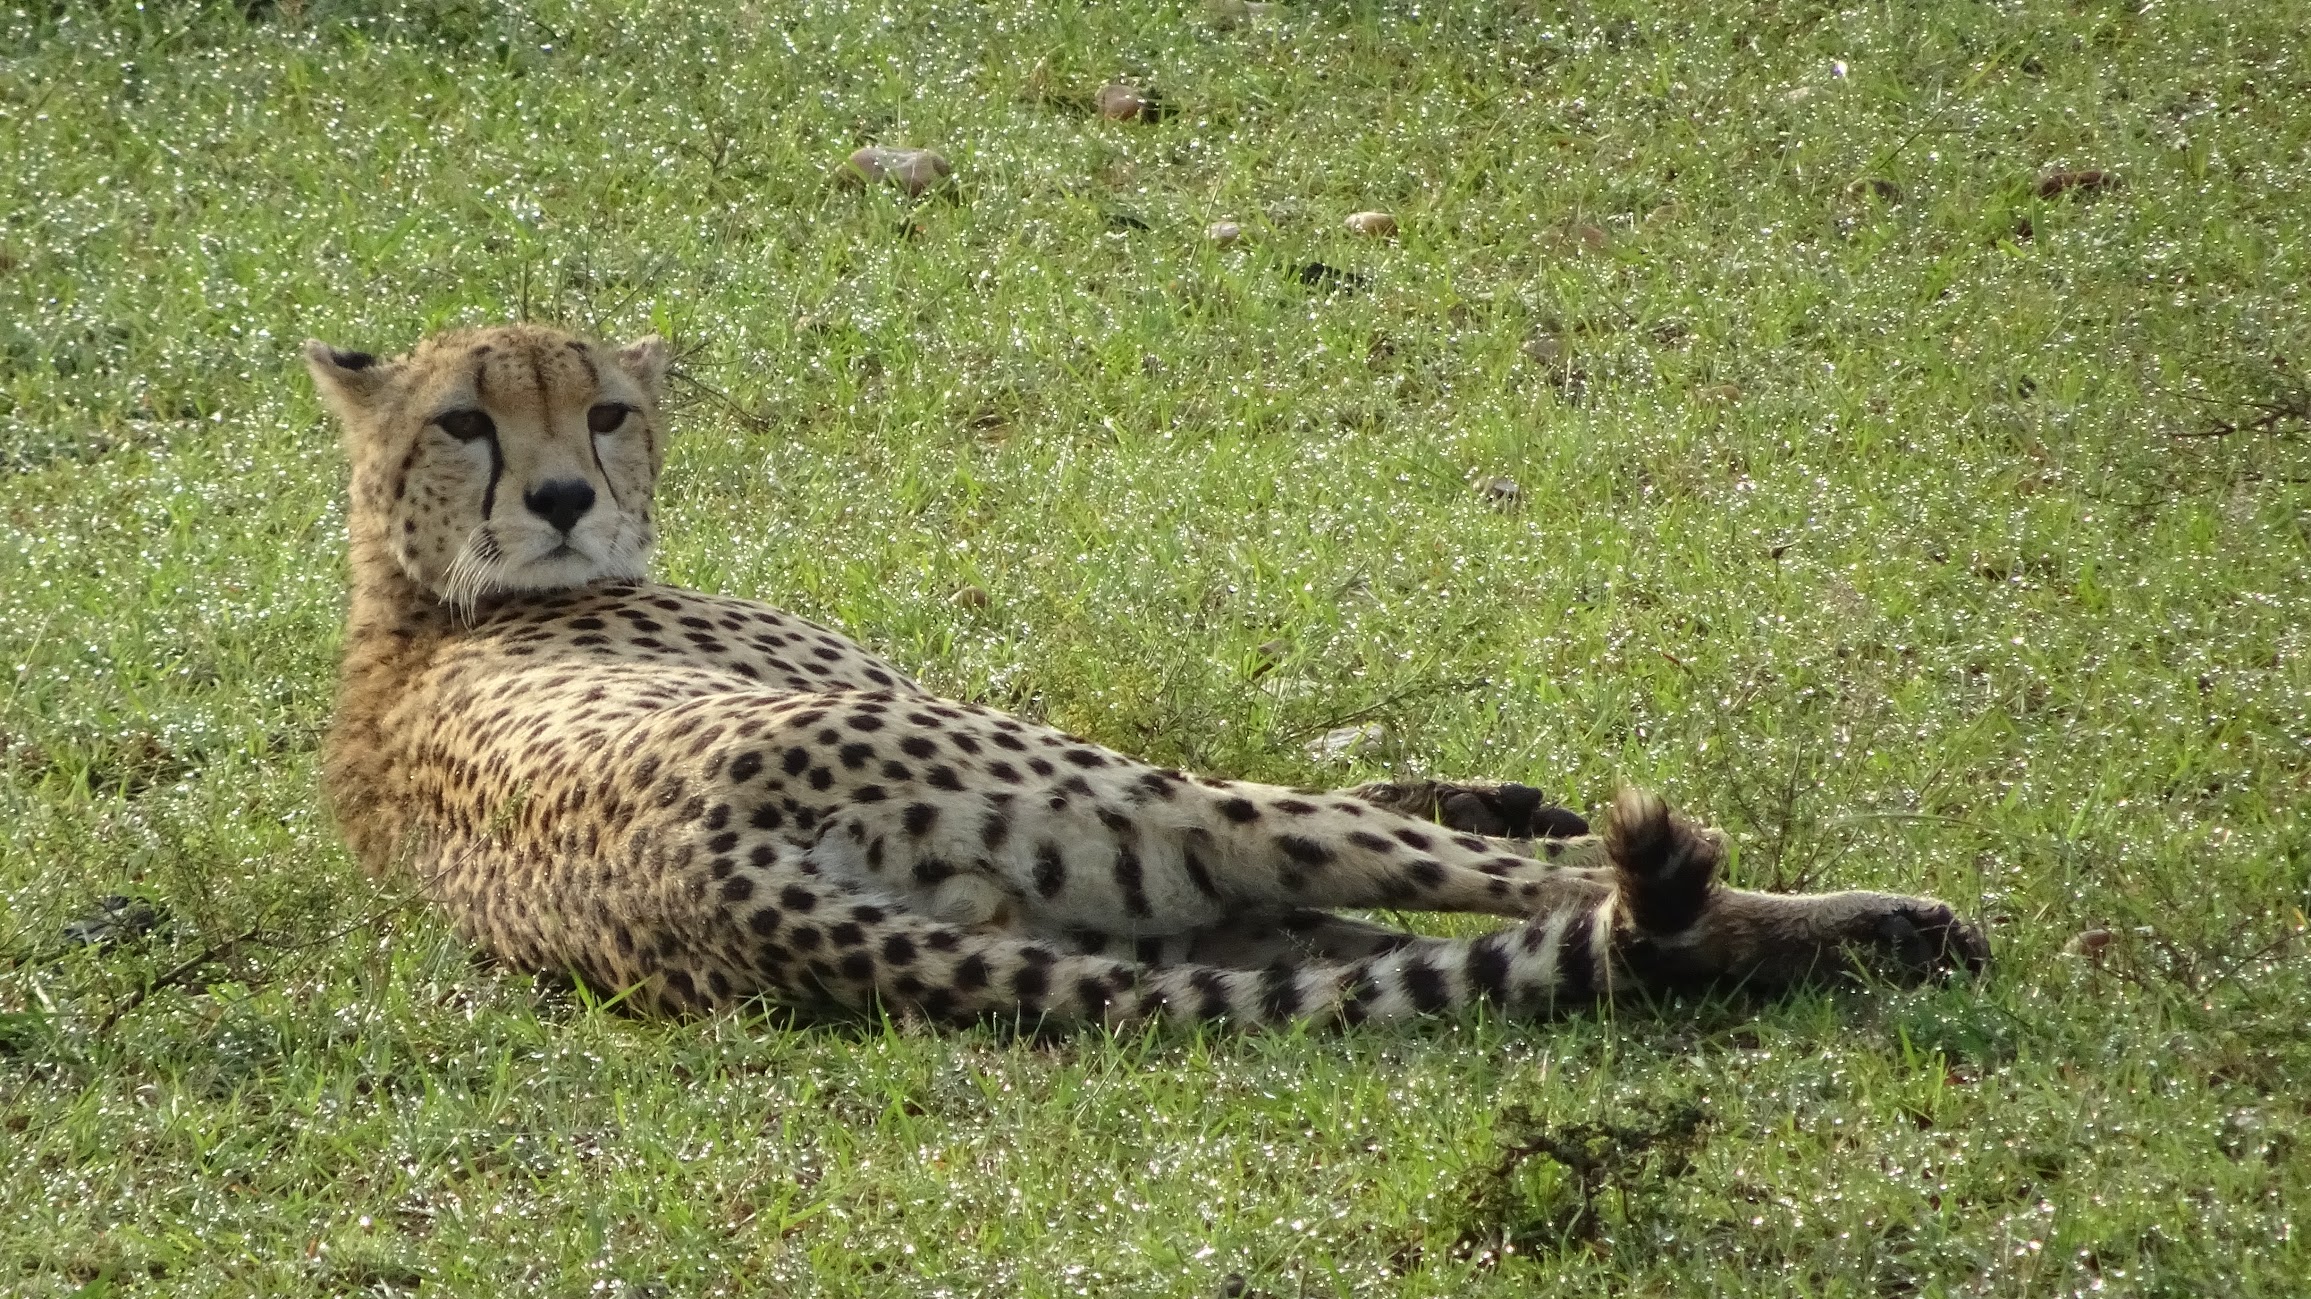 Cheetahs spend a lot of time laying down but continously stay alert for threats.